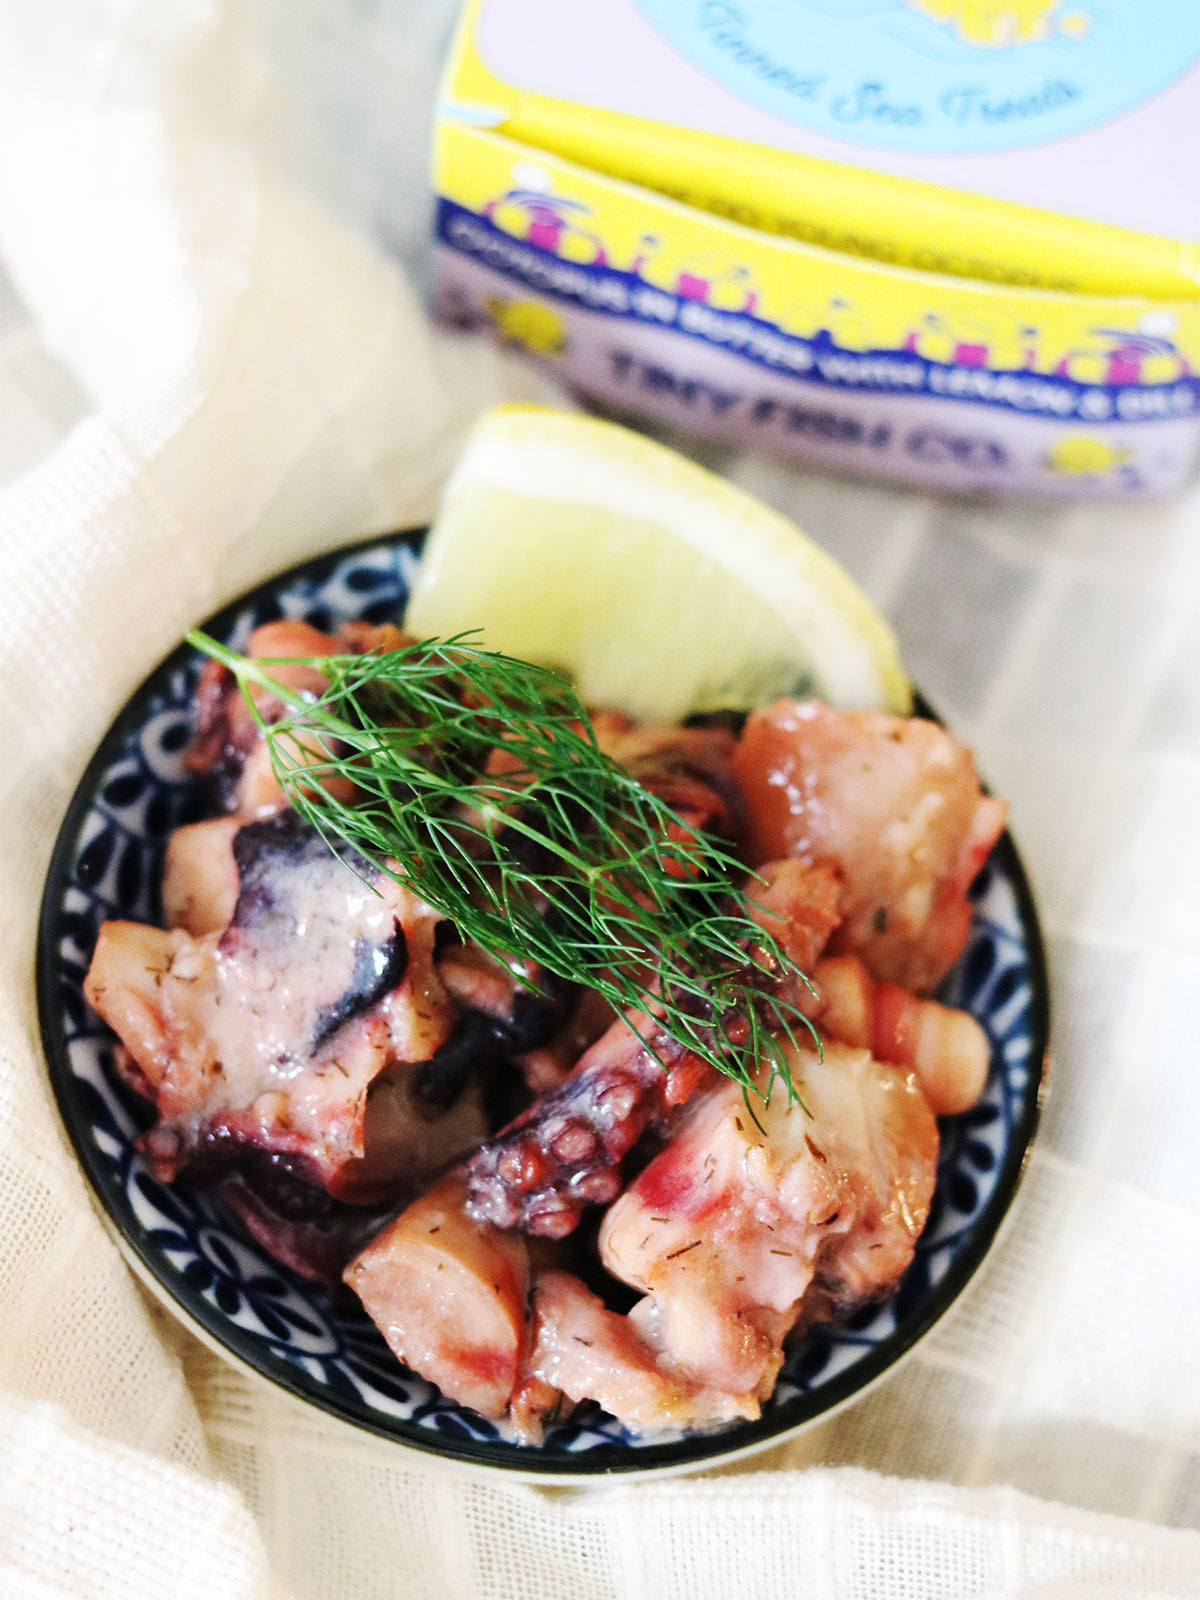 Octopus in Butter with Lemon & Dill - Tiny Fish Co. - Mitzie Mee Shop